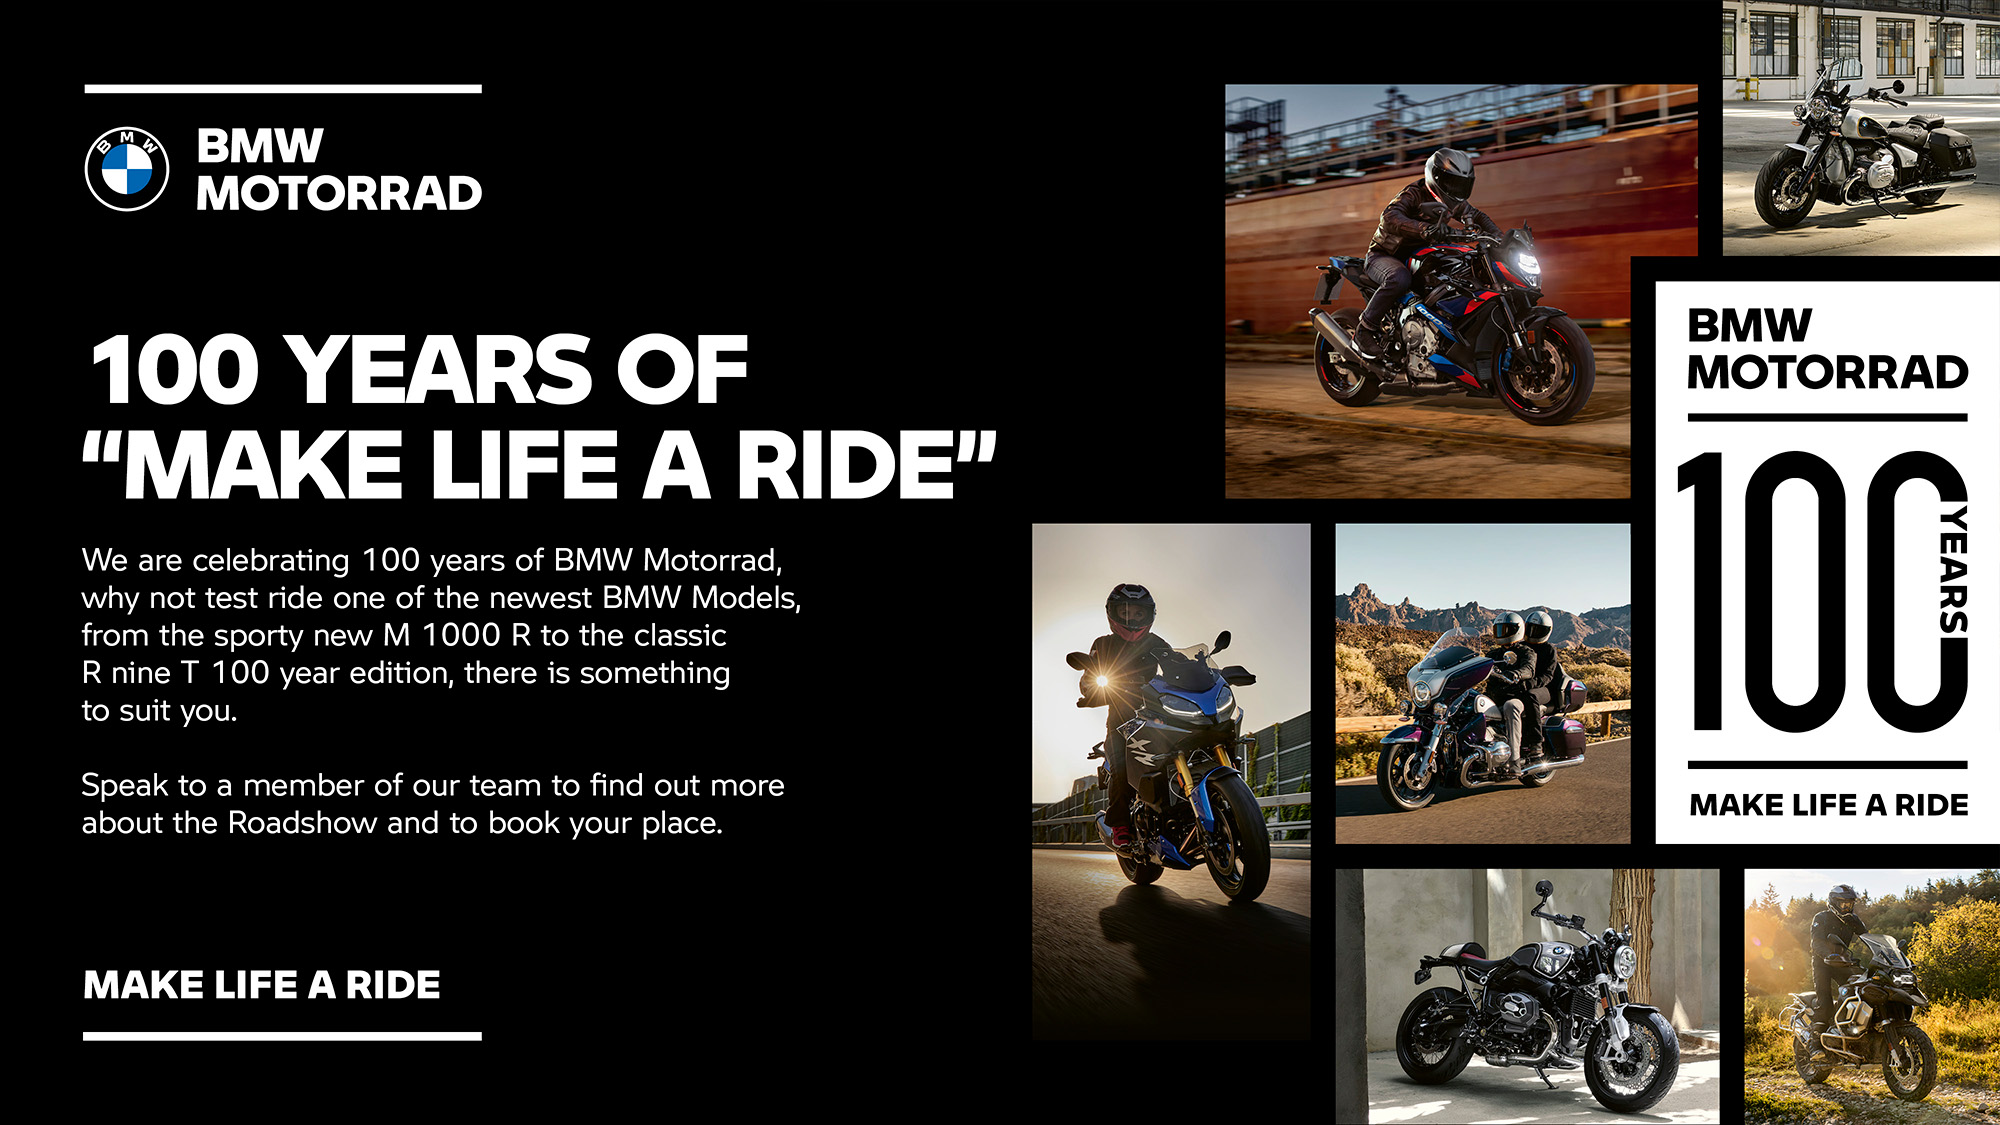 100 Years of "Make Life A Ride"